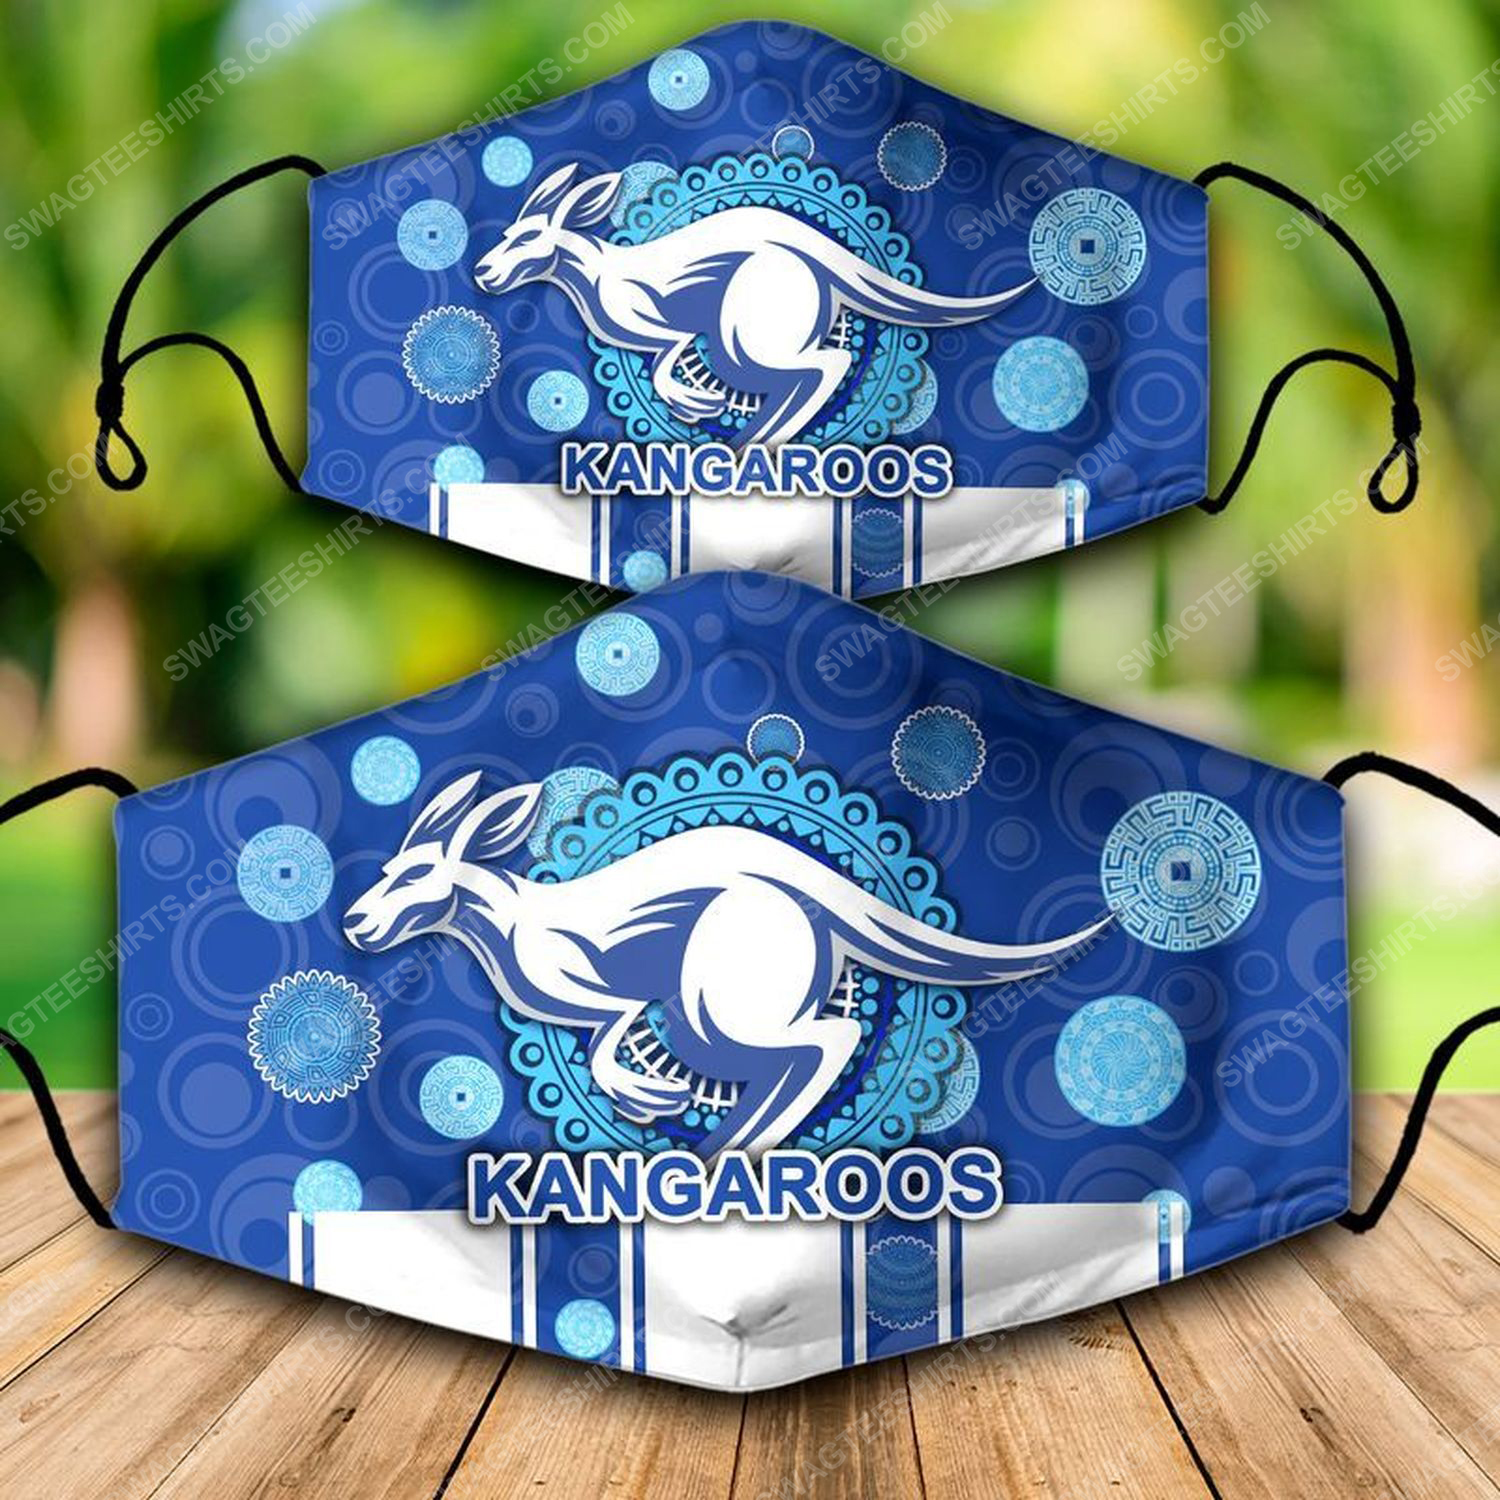 [special edition] Football club north melbourne kangaroos face mask – maria